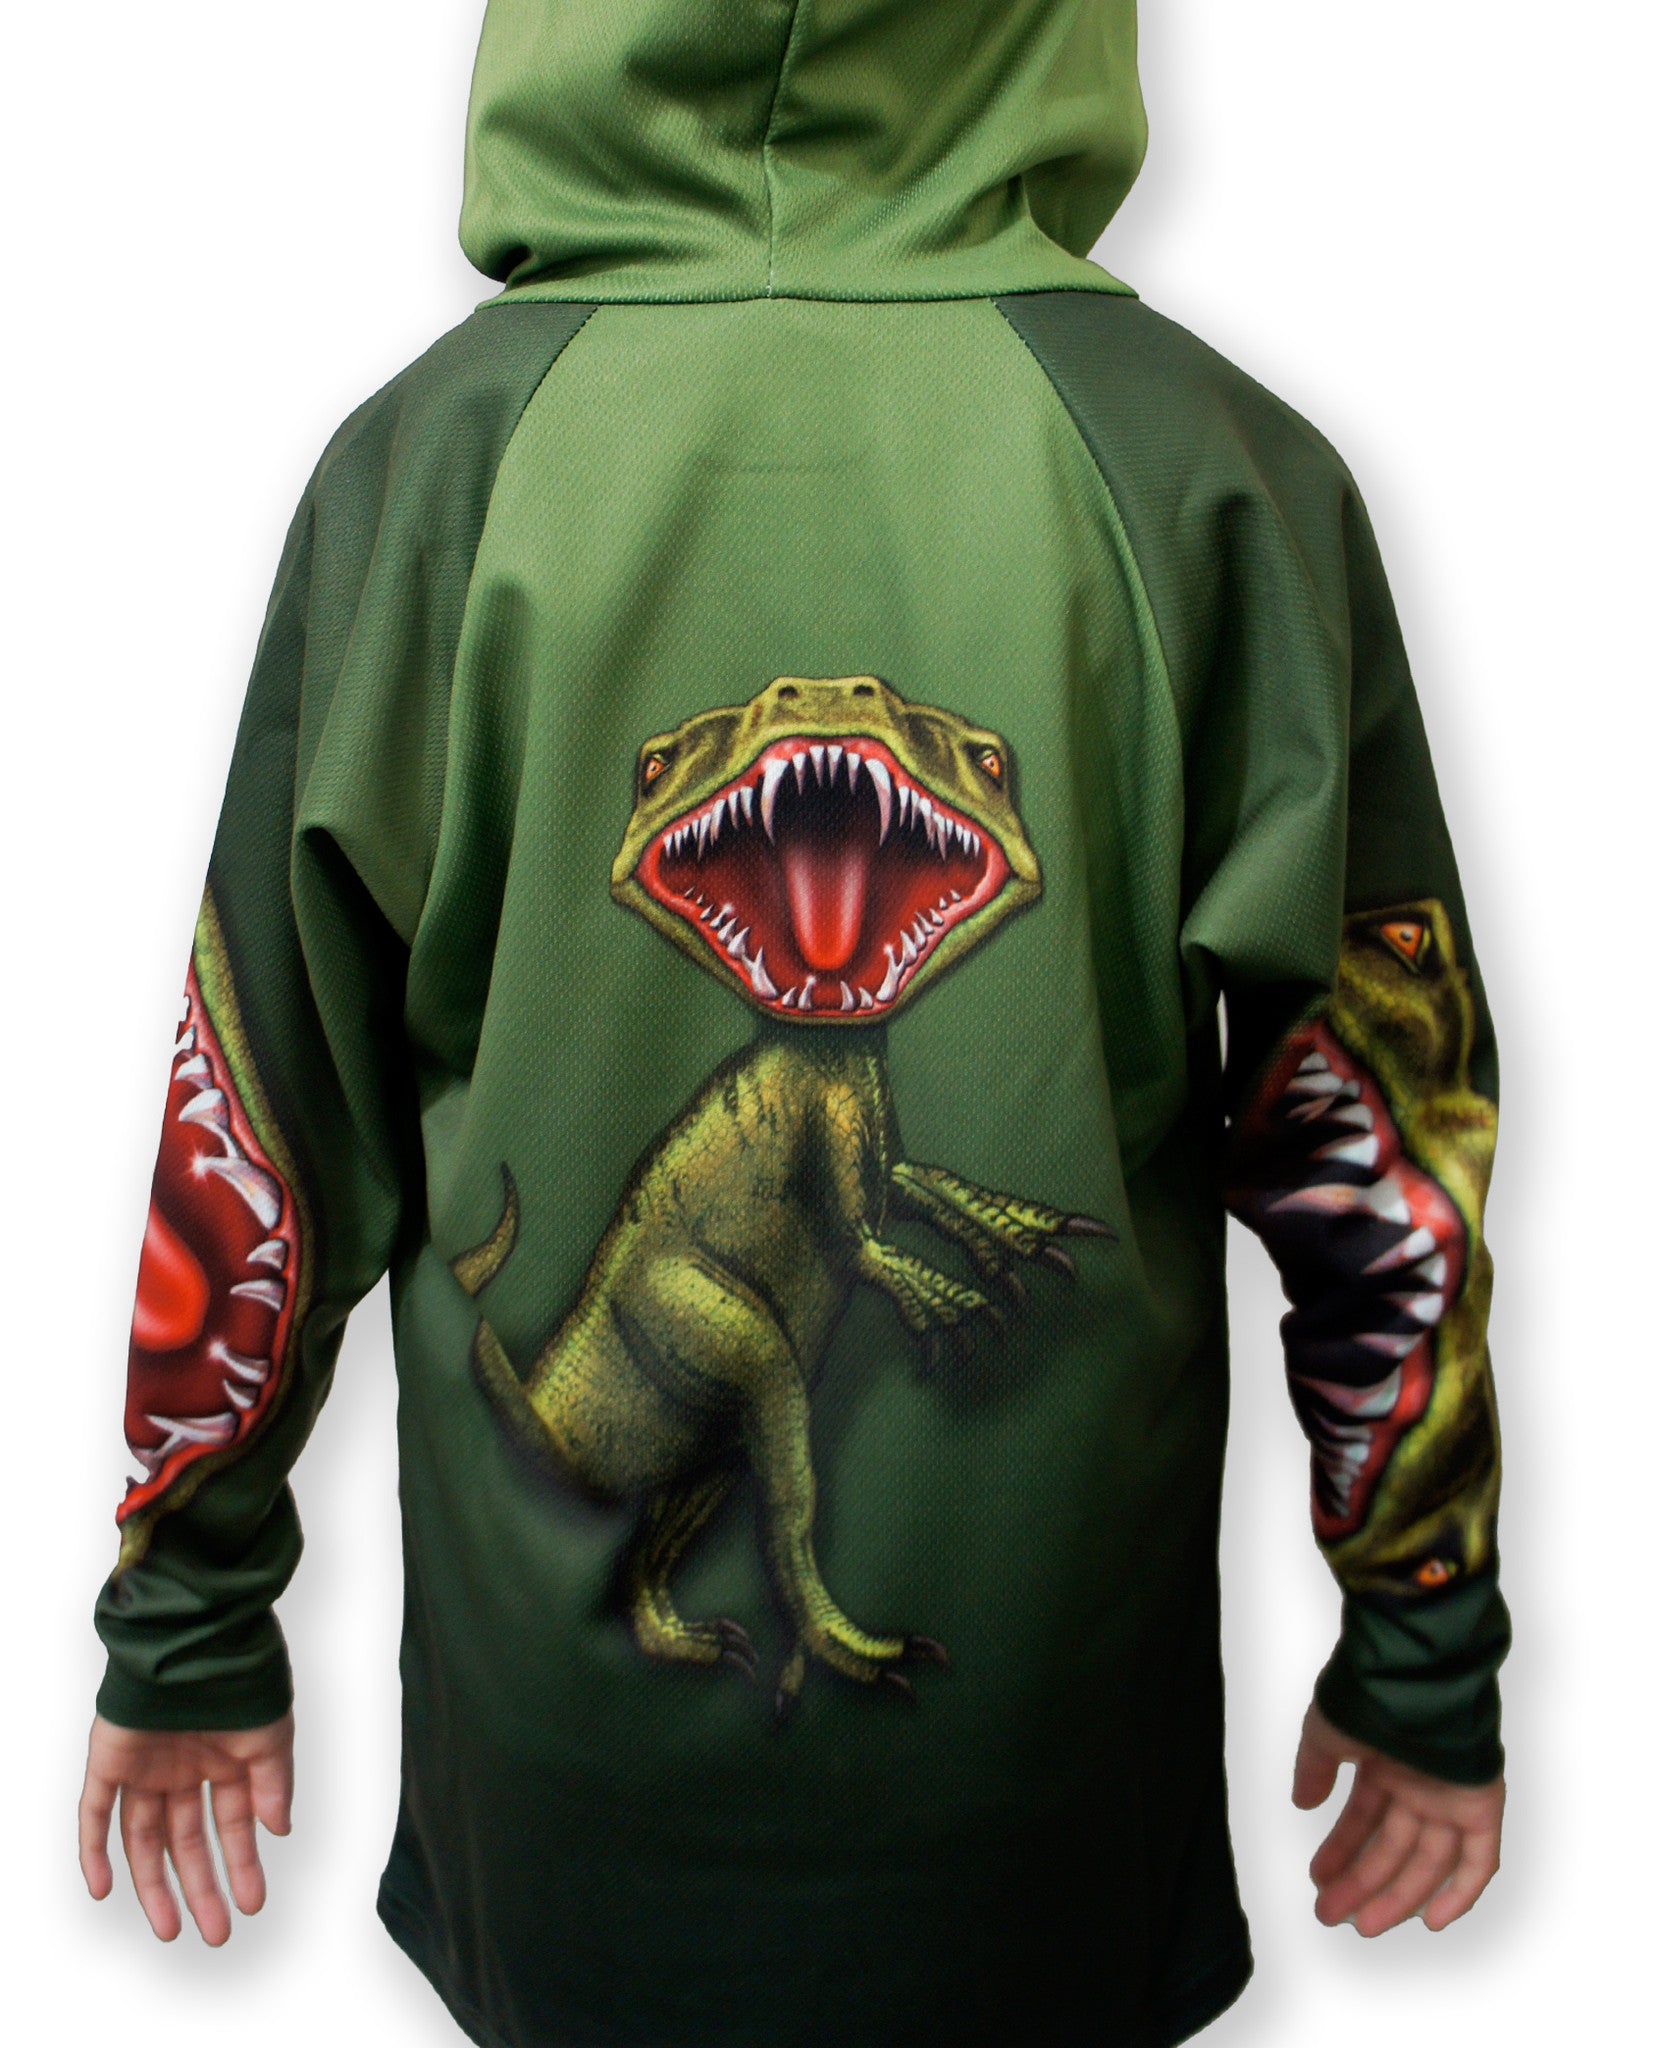 Raptor Hoodie Shirt by Mouthman for kids and adults. $31.99-$56.99 ...